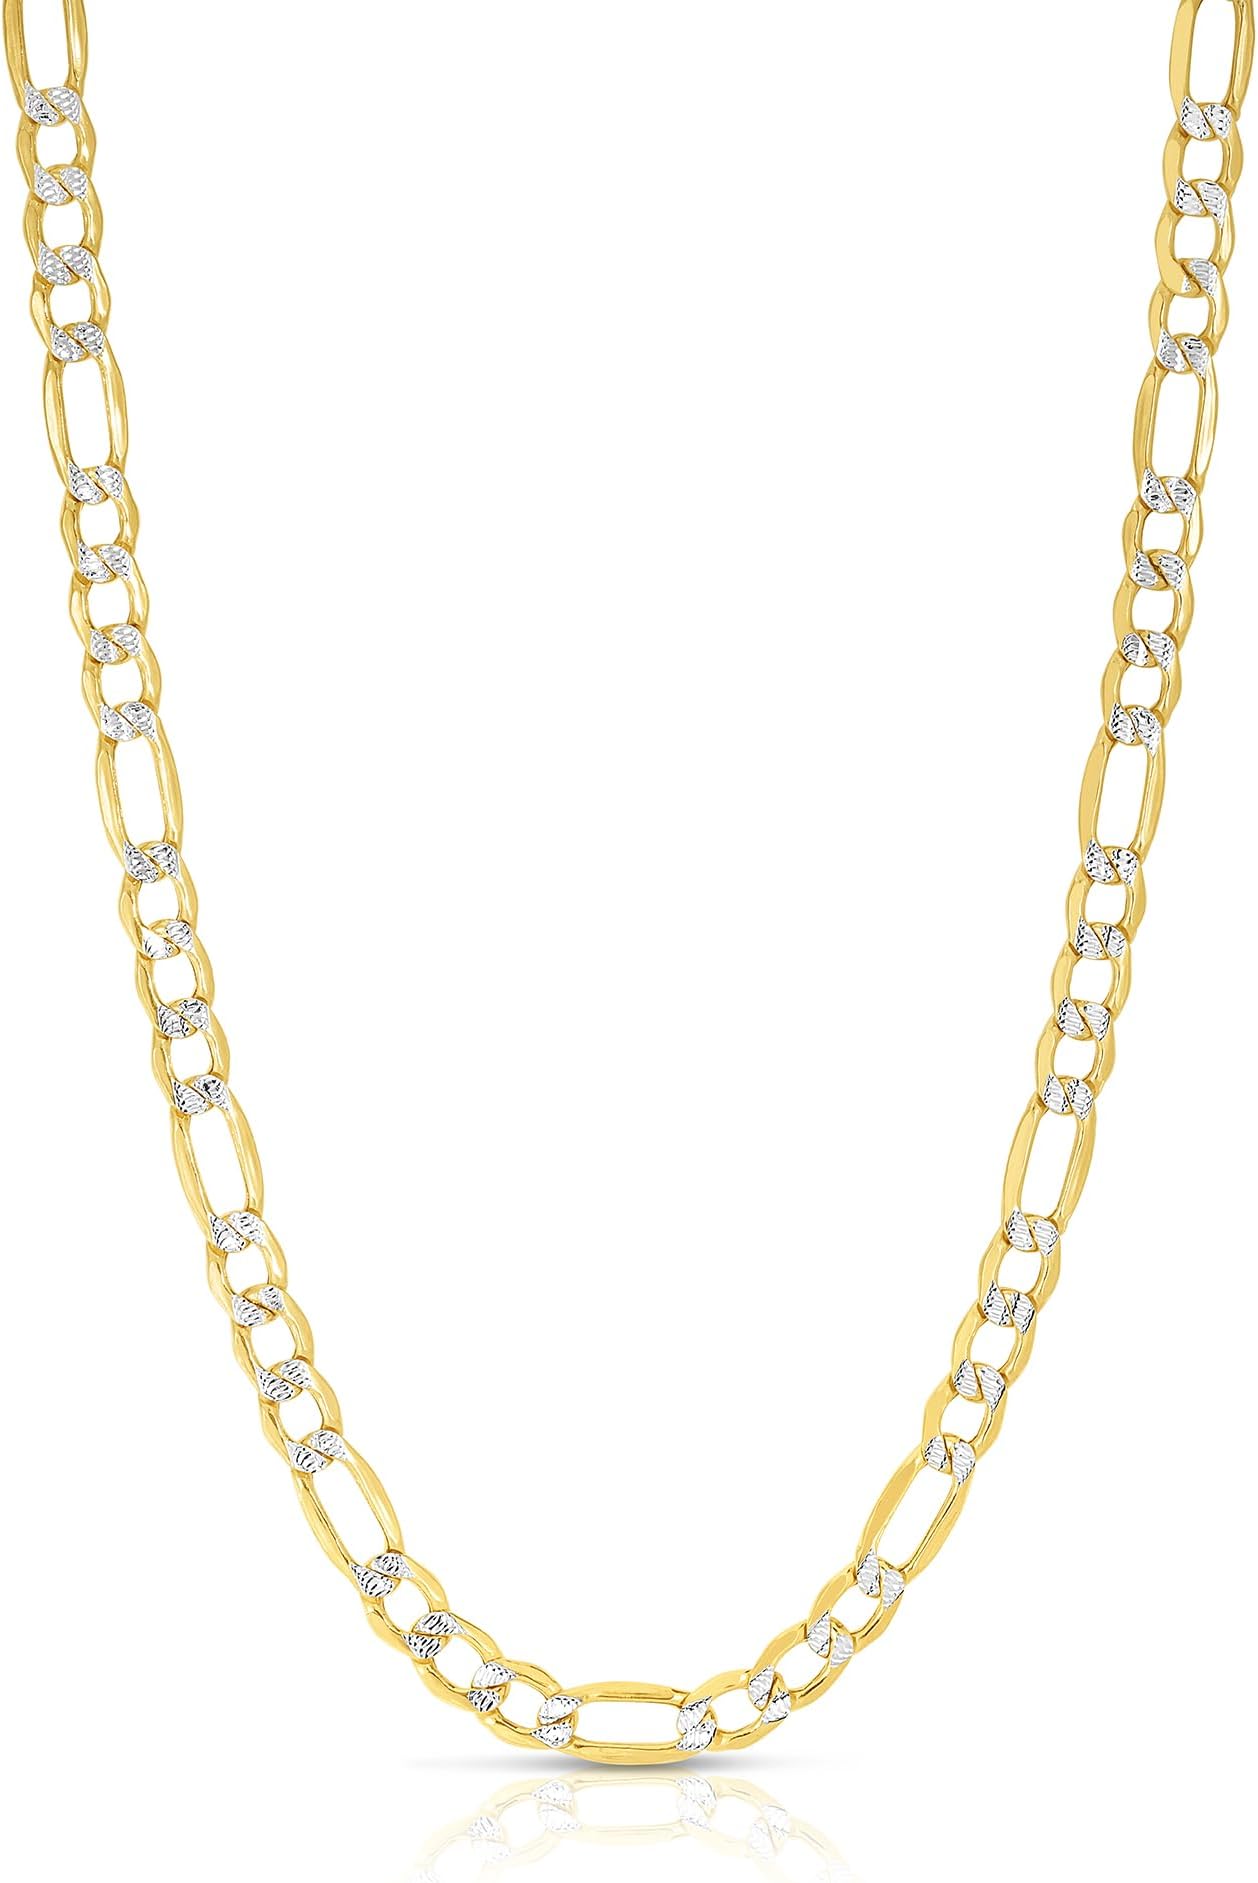 10k Two-Tone Gold 5.5mm Lite Pave Diamond Cut Figaro Chain Link Necklace